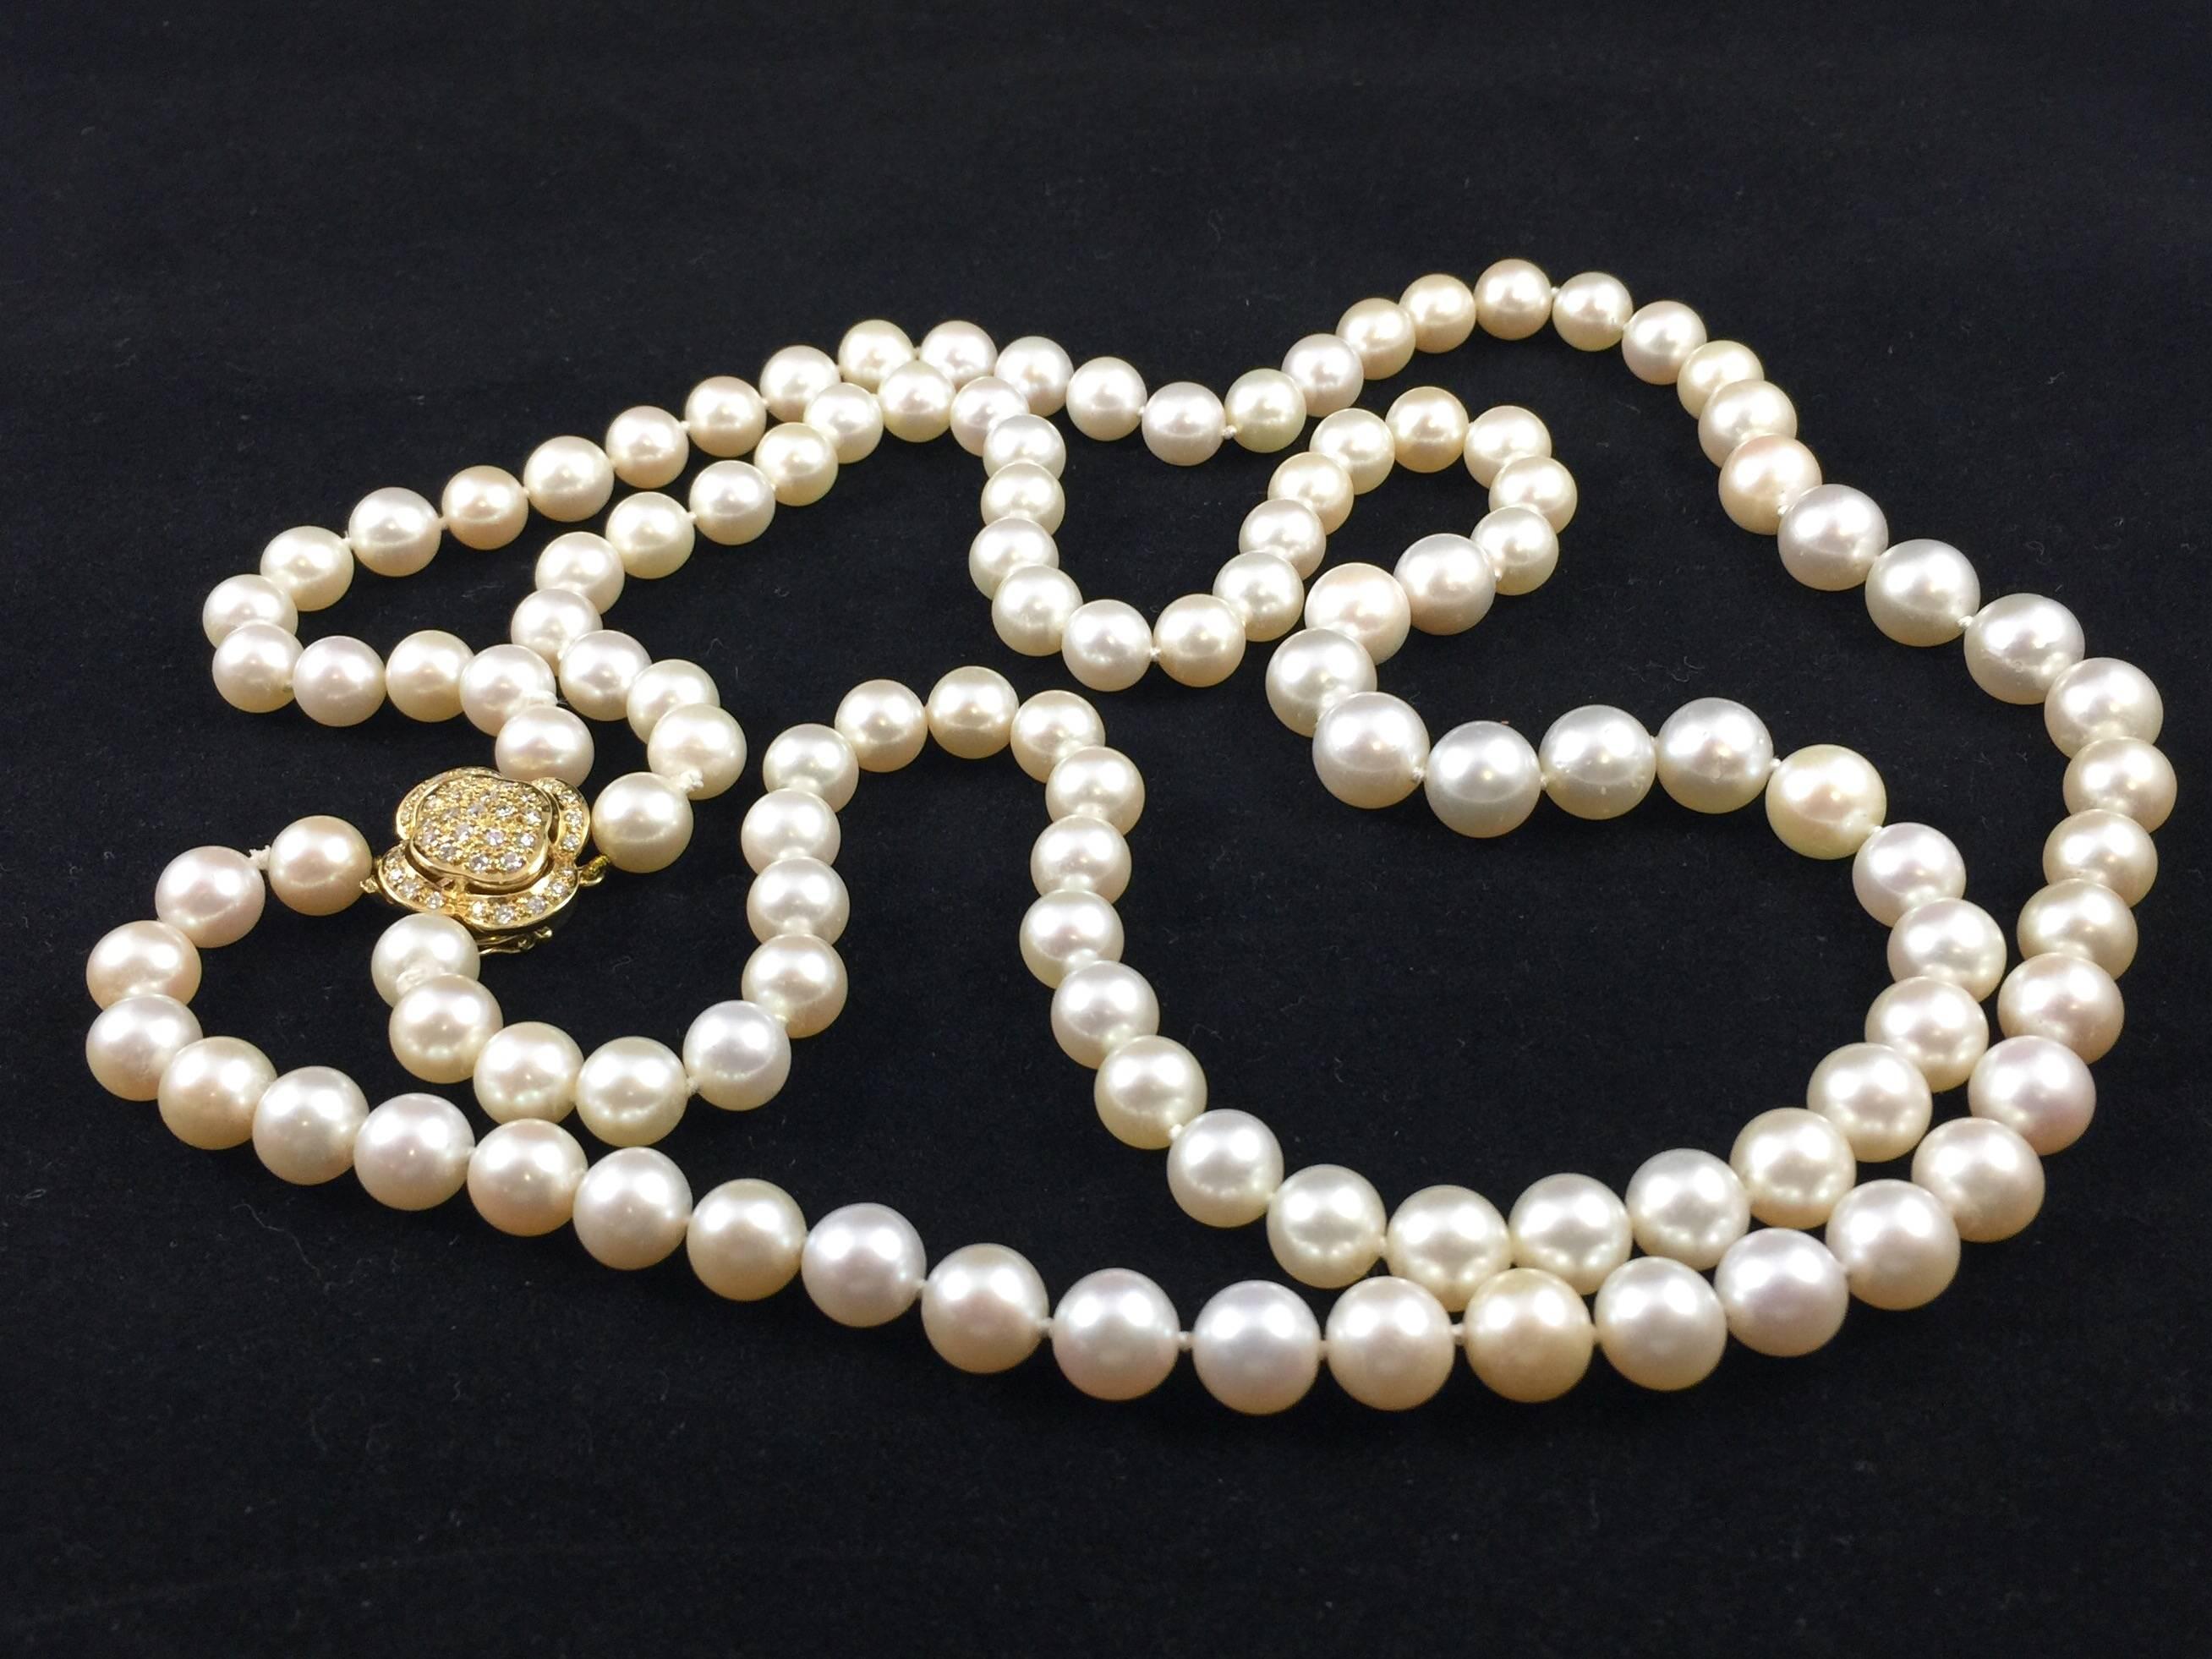 Nothing in jewelry says Classic like pearls!  The shorter strand is 18